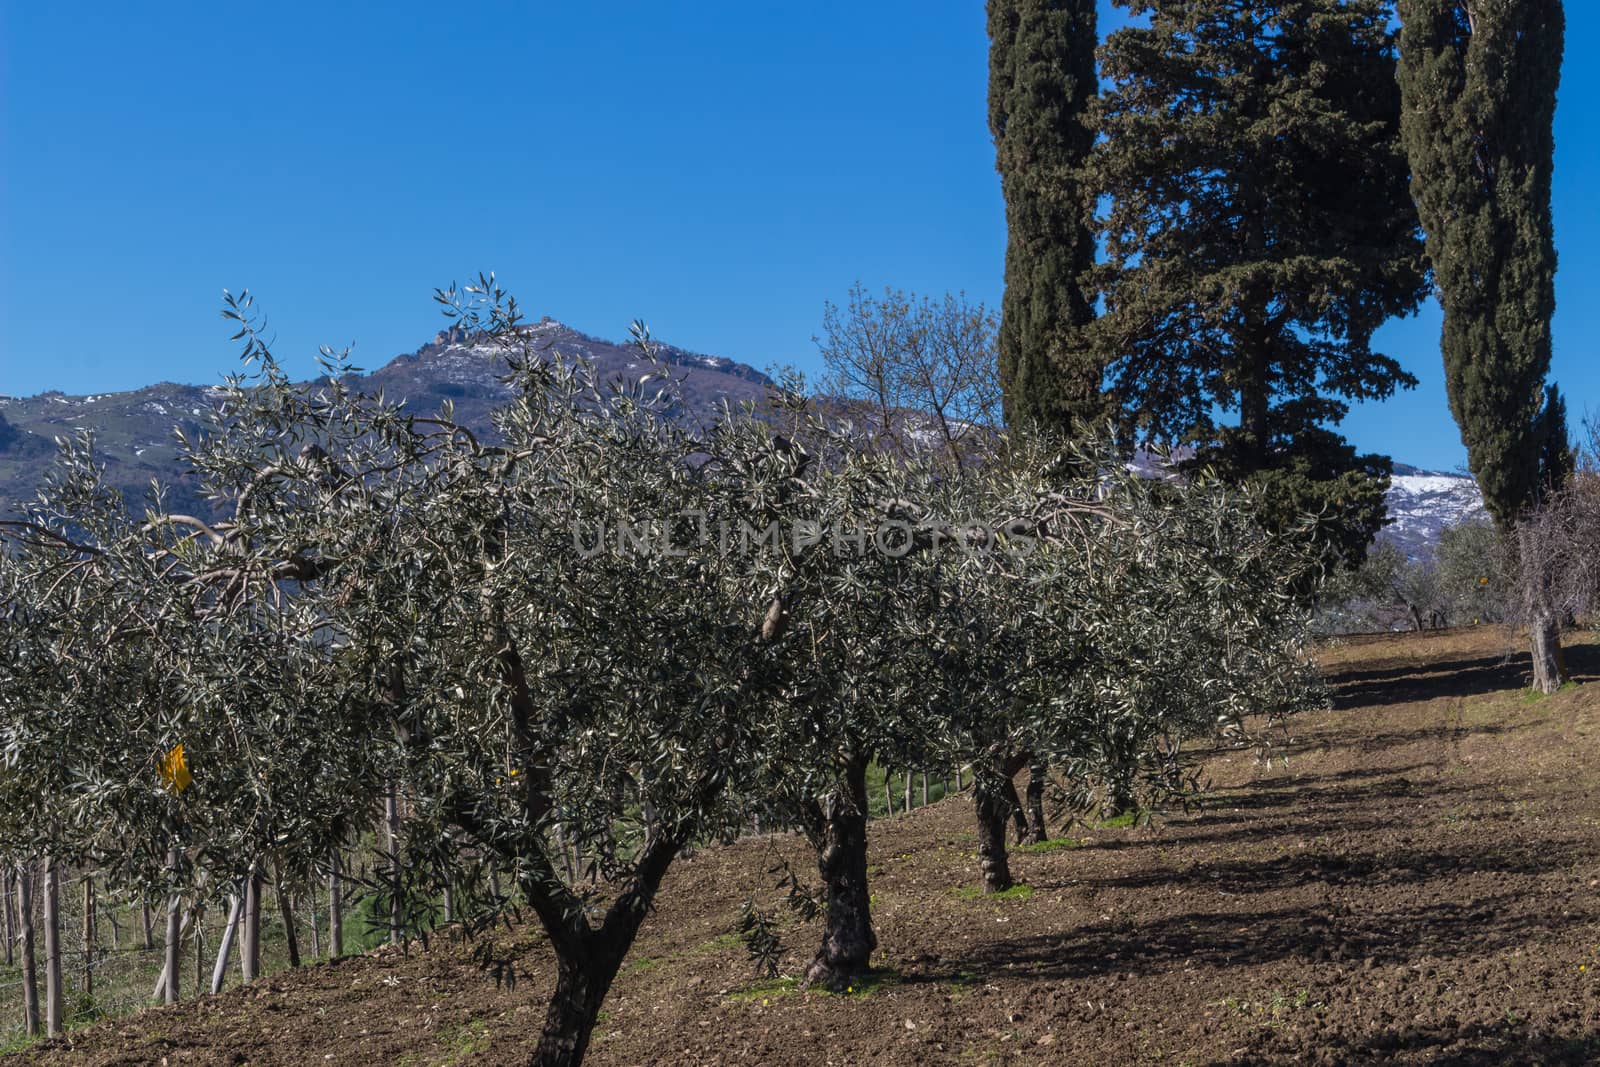 The olive grove in the Tuscany, Italy.